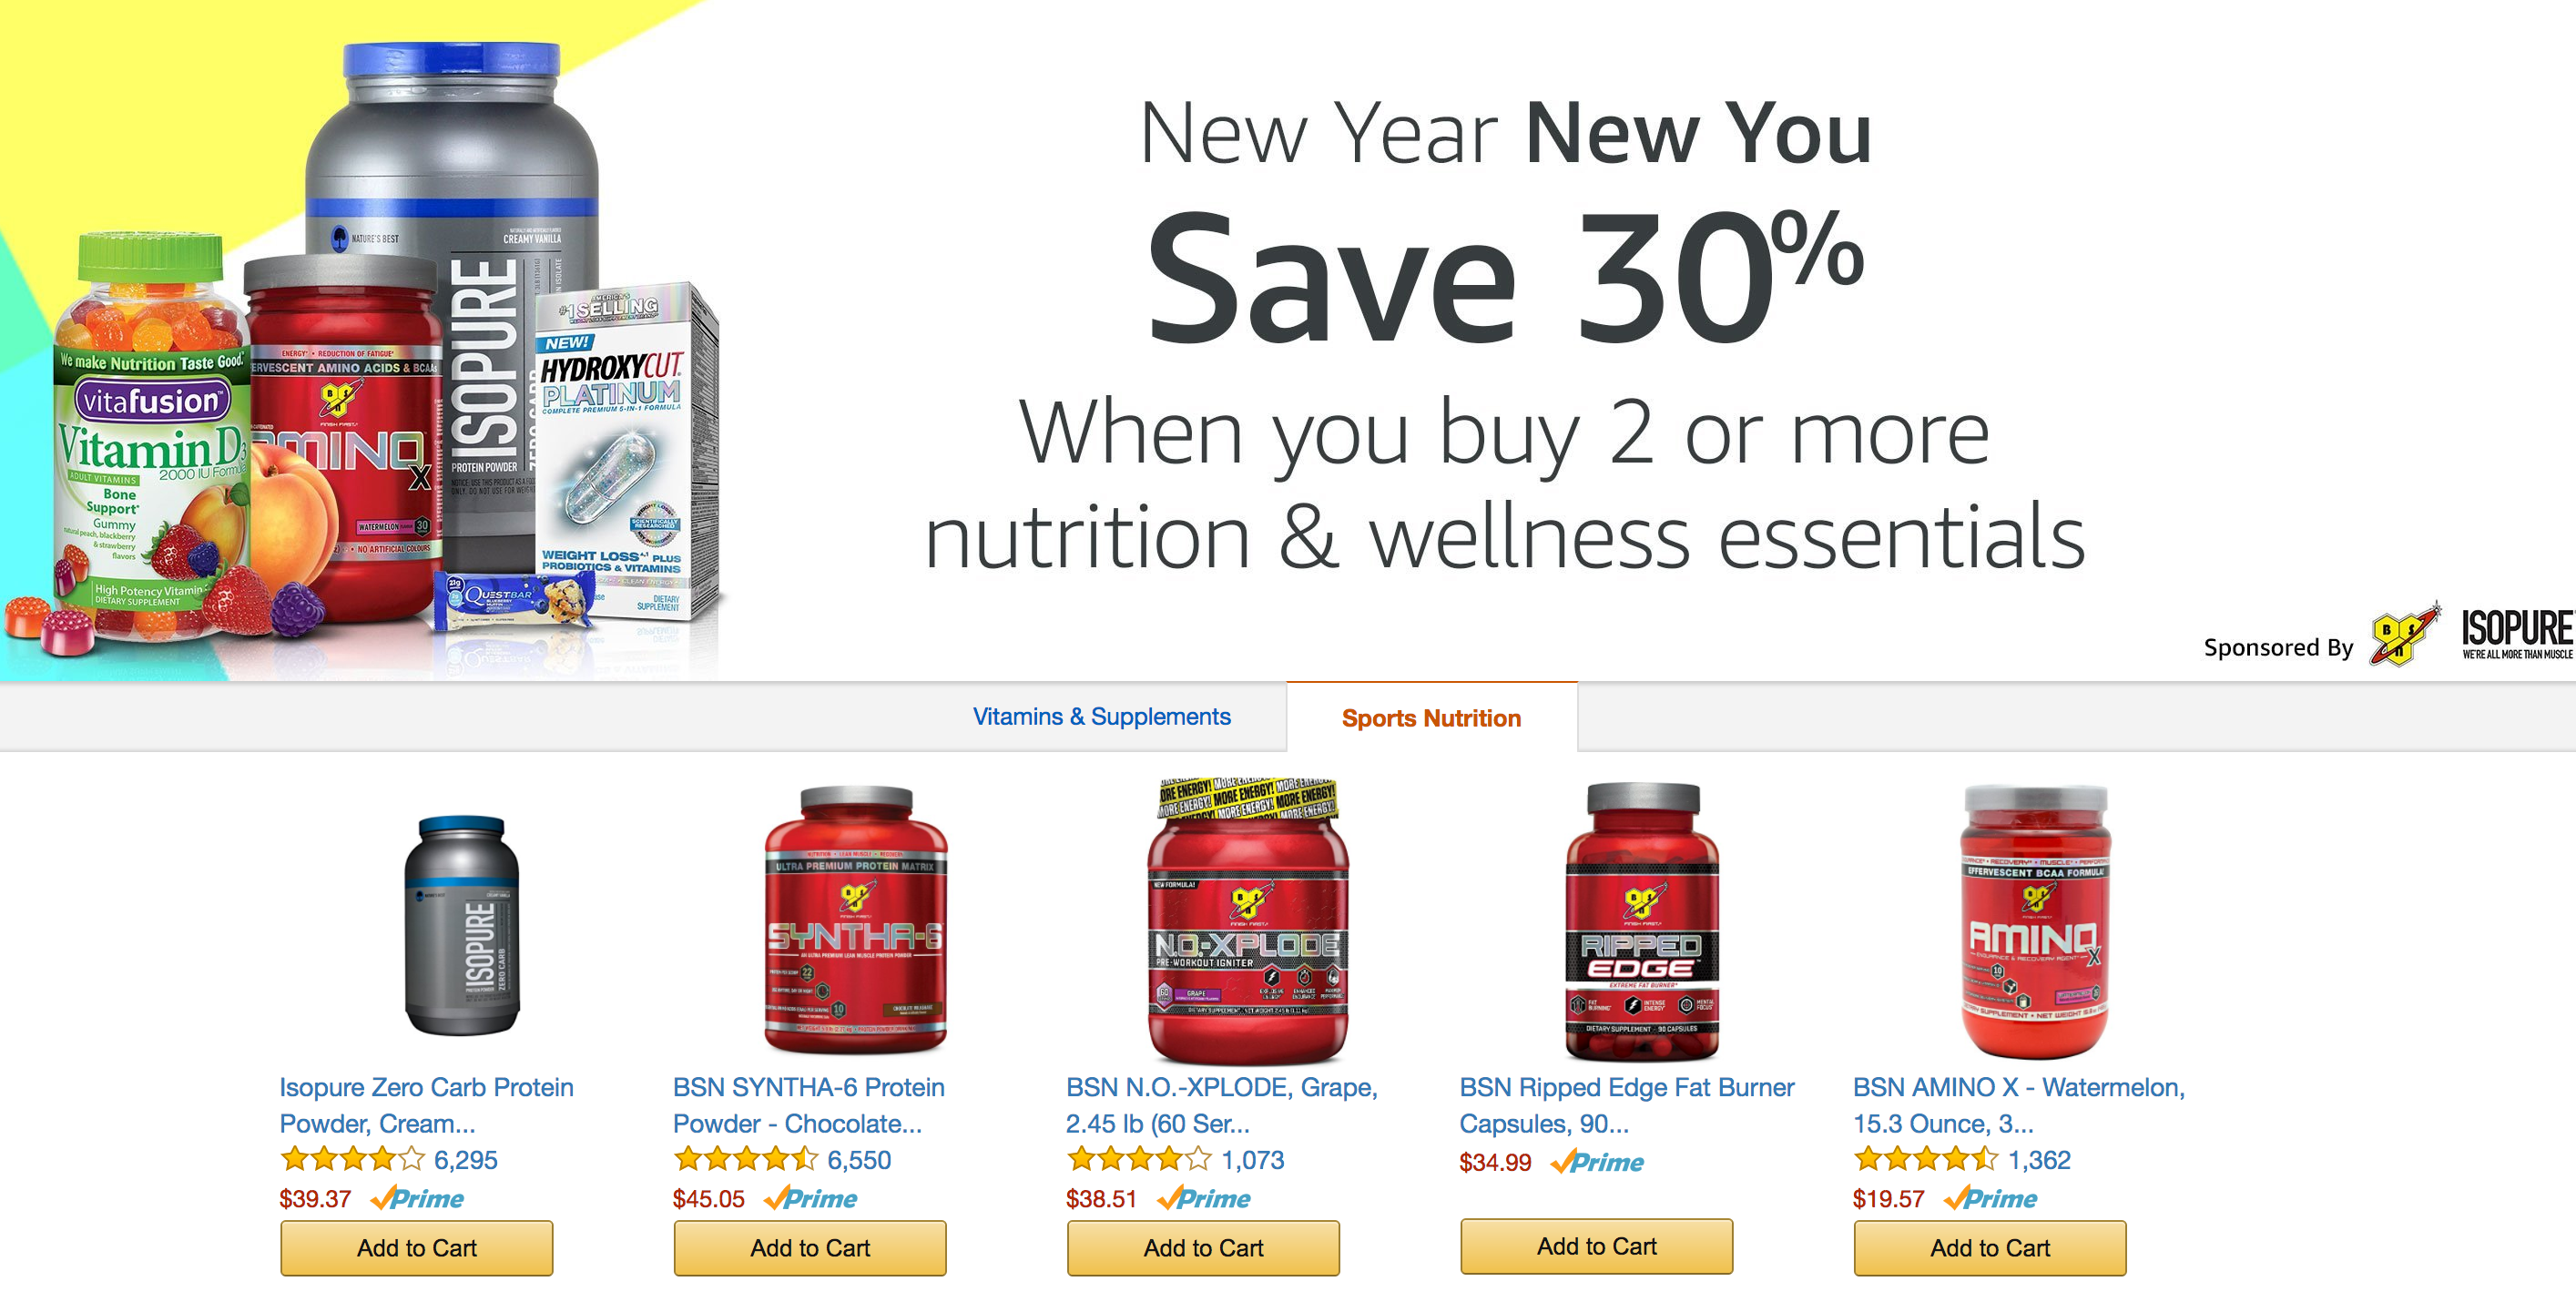 amazon-bsn-protein-products